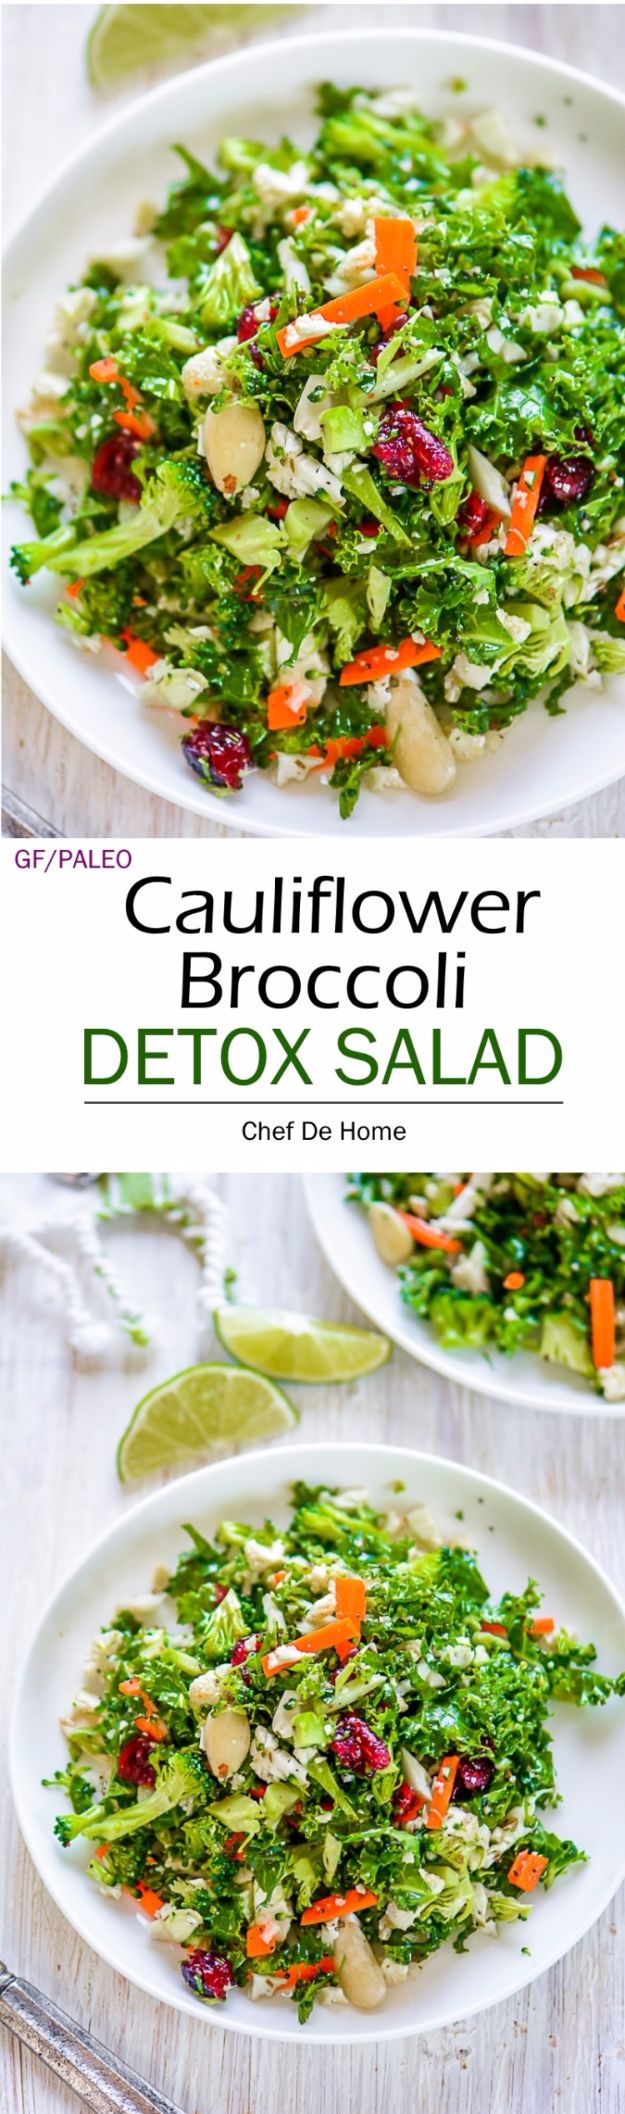 Best Broccoli Recipes - Cauliflower And Broccoli Detox Salad - Recipe Ideas for Roasted, Steamed, Fresh or Frozen, Healthy, Cheesy, Soup, Salad, Casseroles and Side Dish Vegetables Made With Broccoli. Shrimp, Chicken, Pasta and Paleo Recipes. Easy Dinner, healthy vegetable recipes 